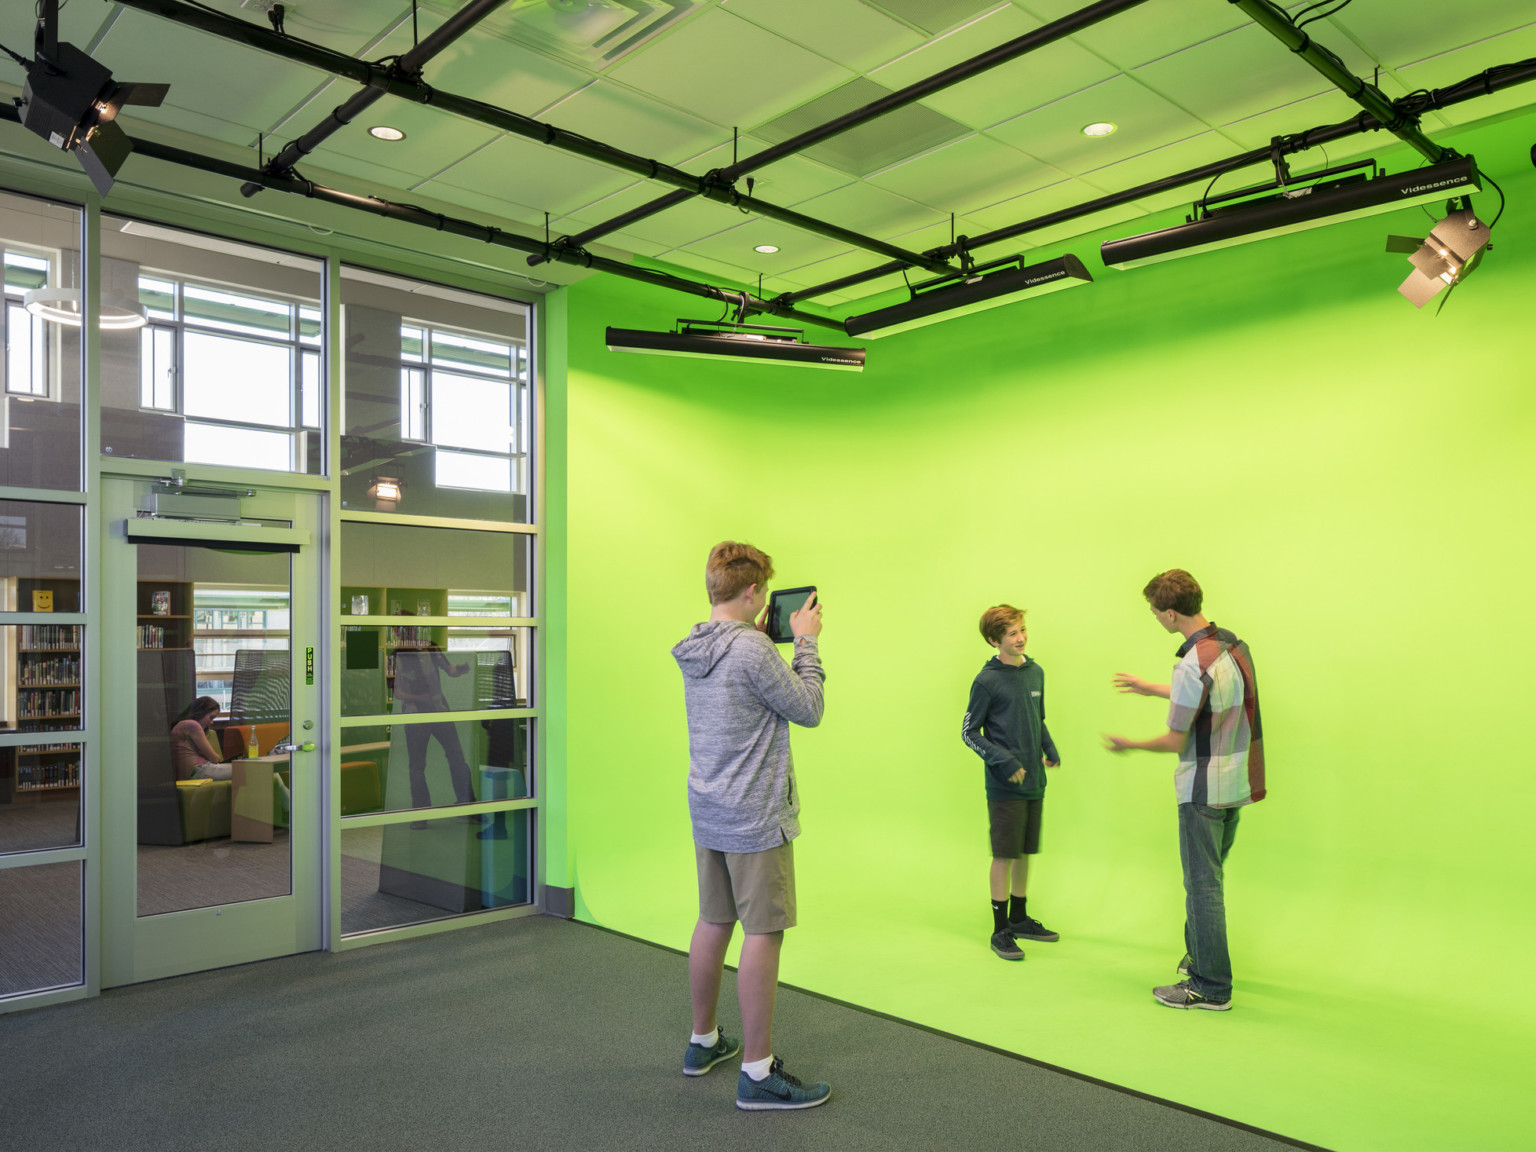 Green screen production set with open frame ceiling rigging and carpeted floor next to transparent glass wall system